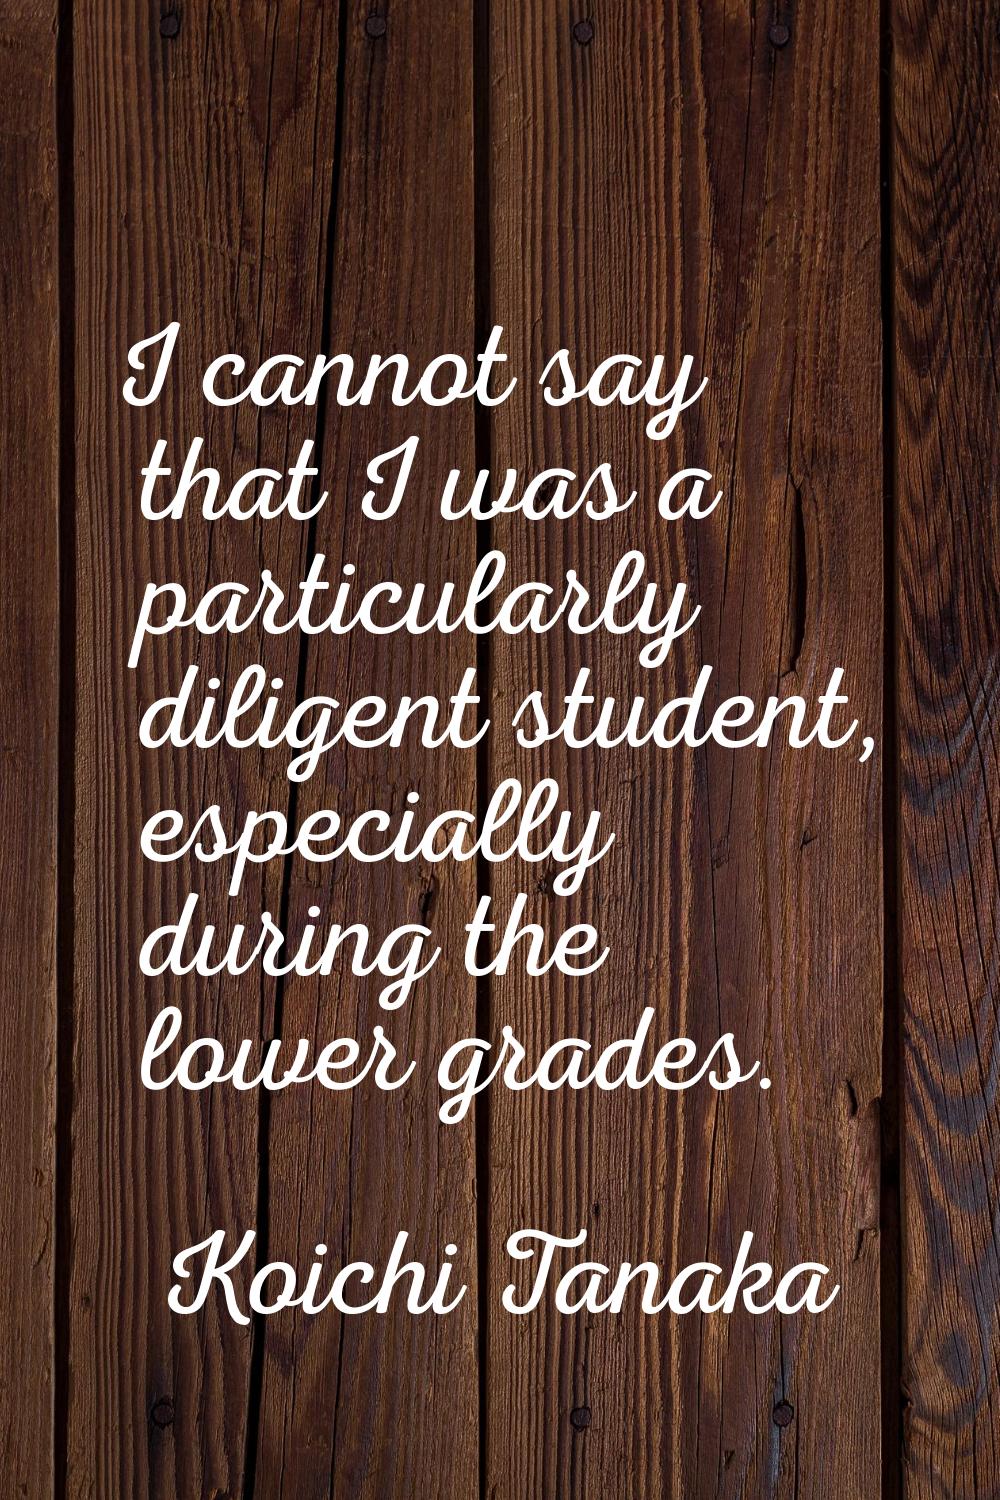 I cannot say that I was a particularly diligent student, especially during the lower grades.